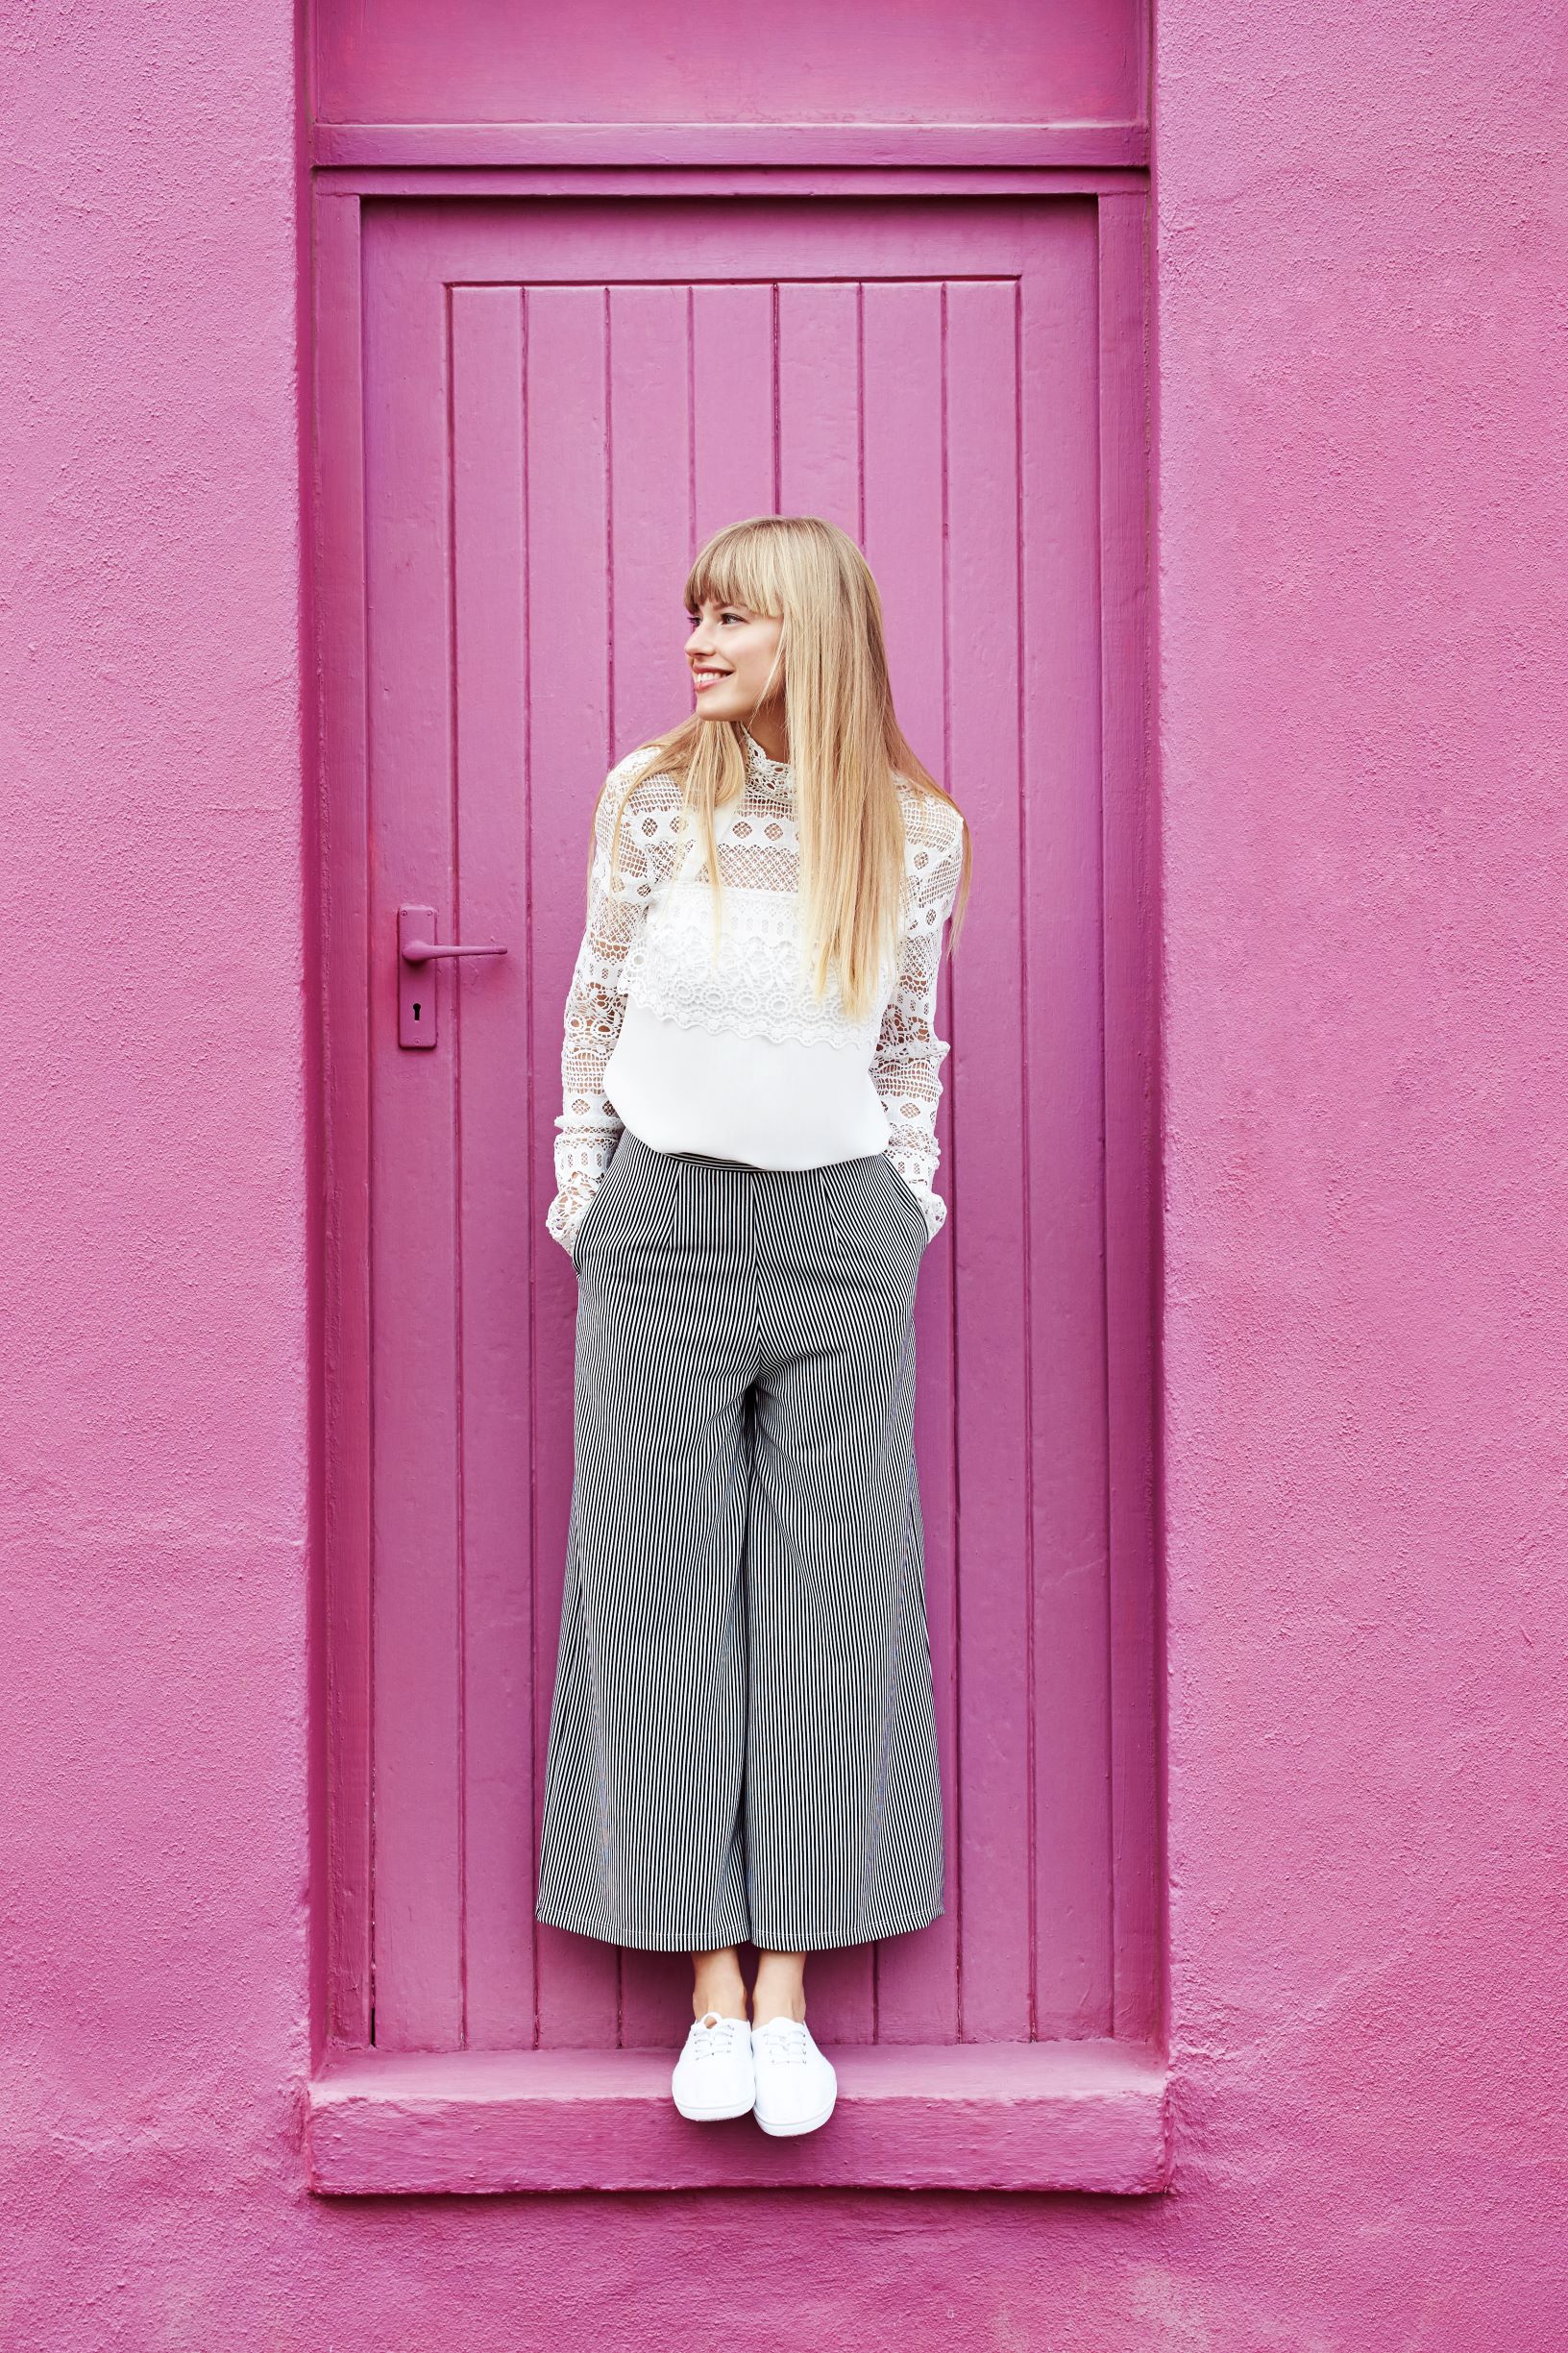 Beyond Trousers & Palazzos: 6 Different Styles of Wide-Leg Pants ...